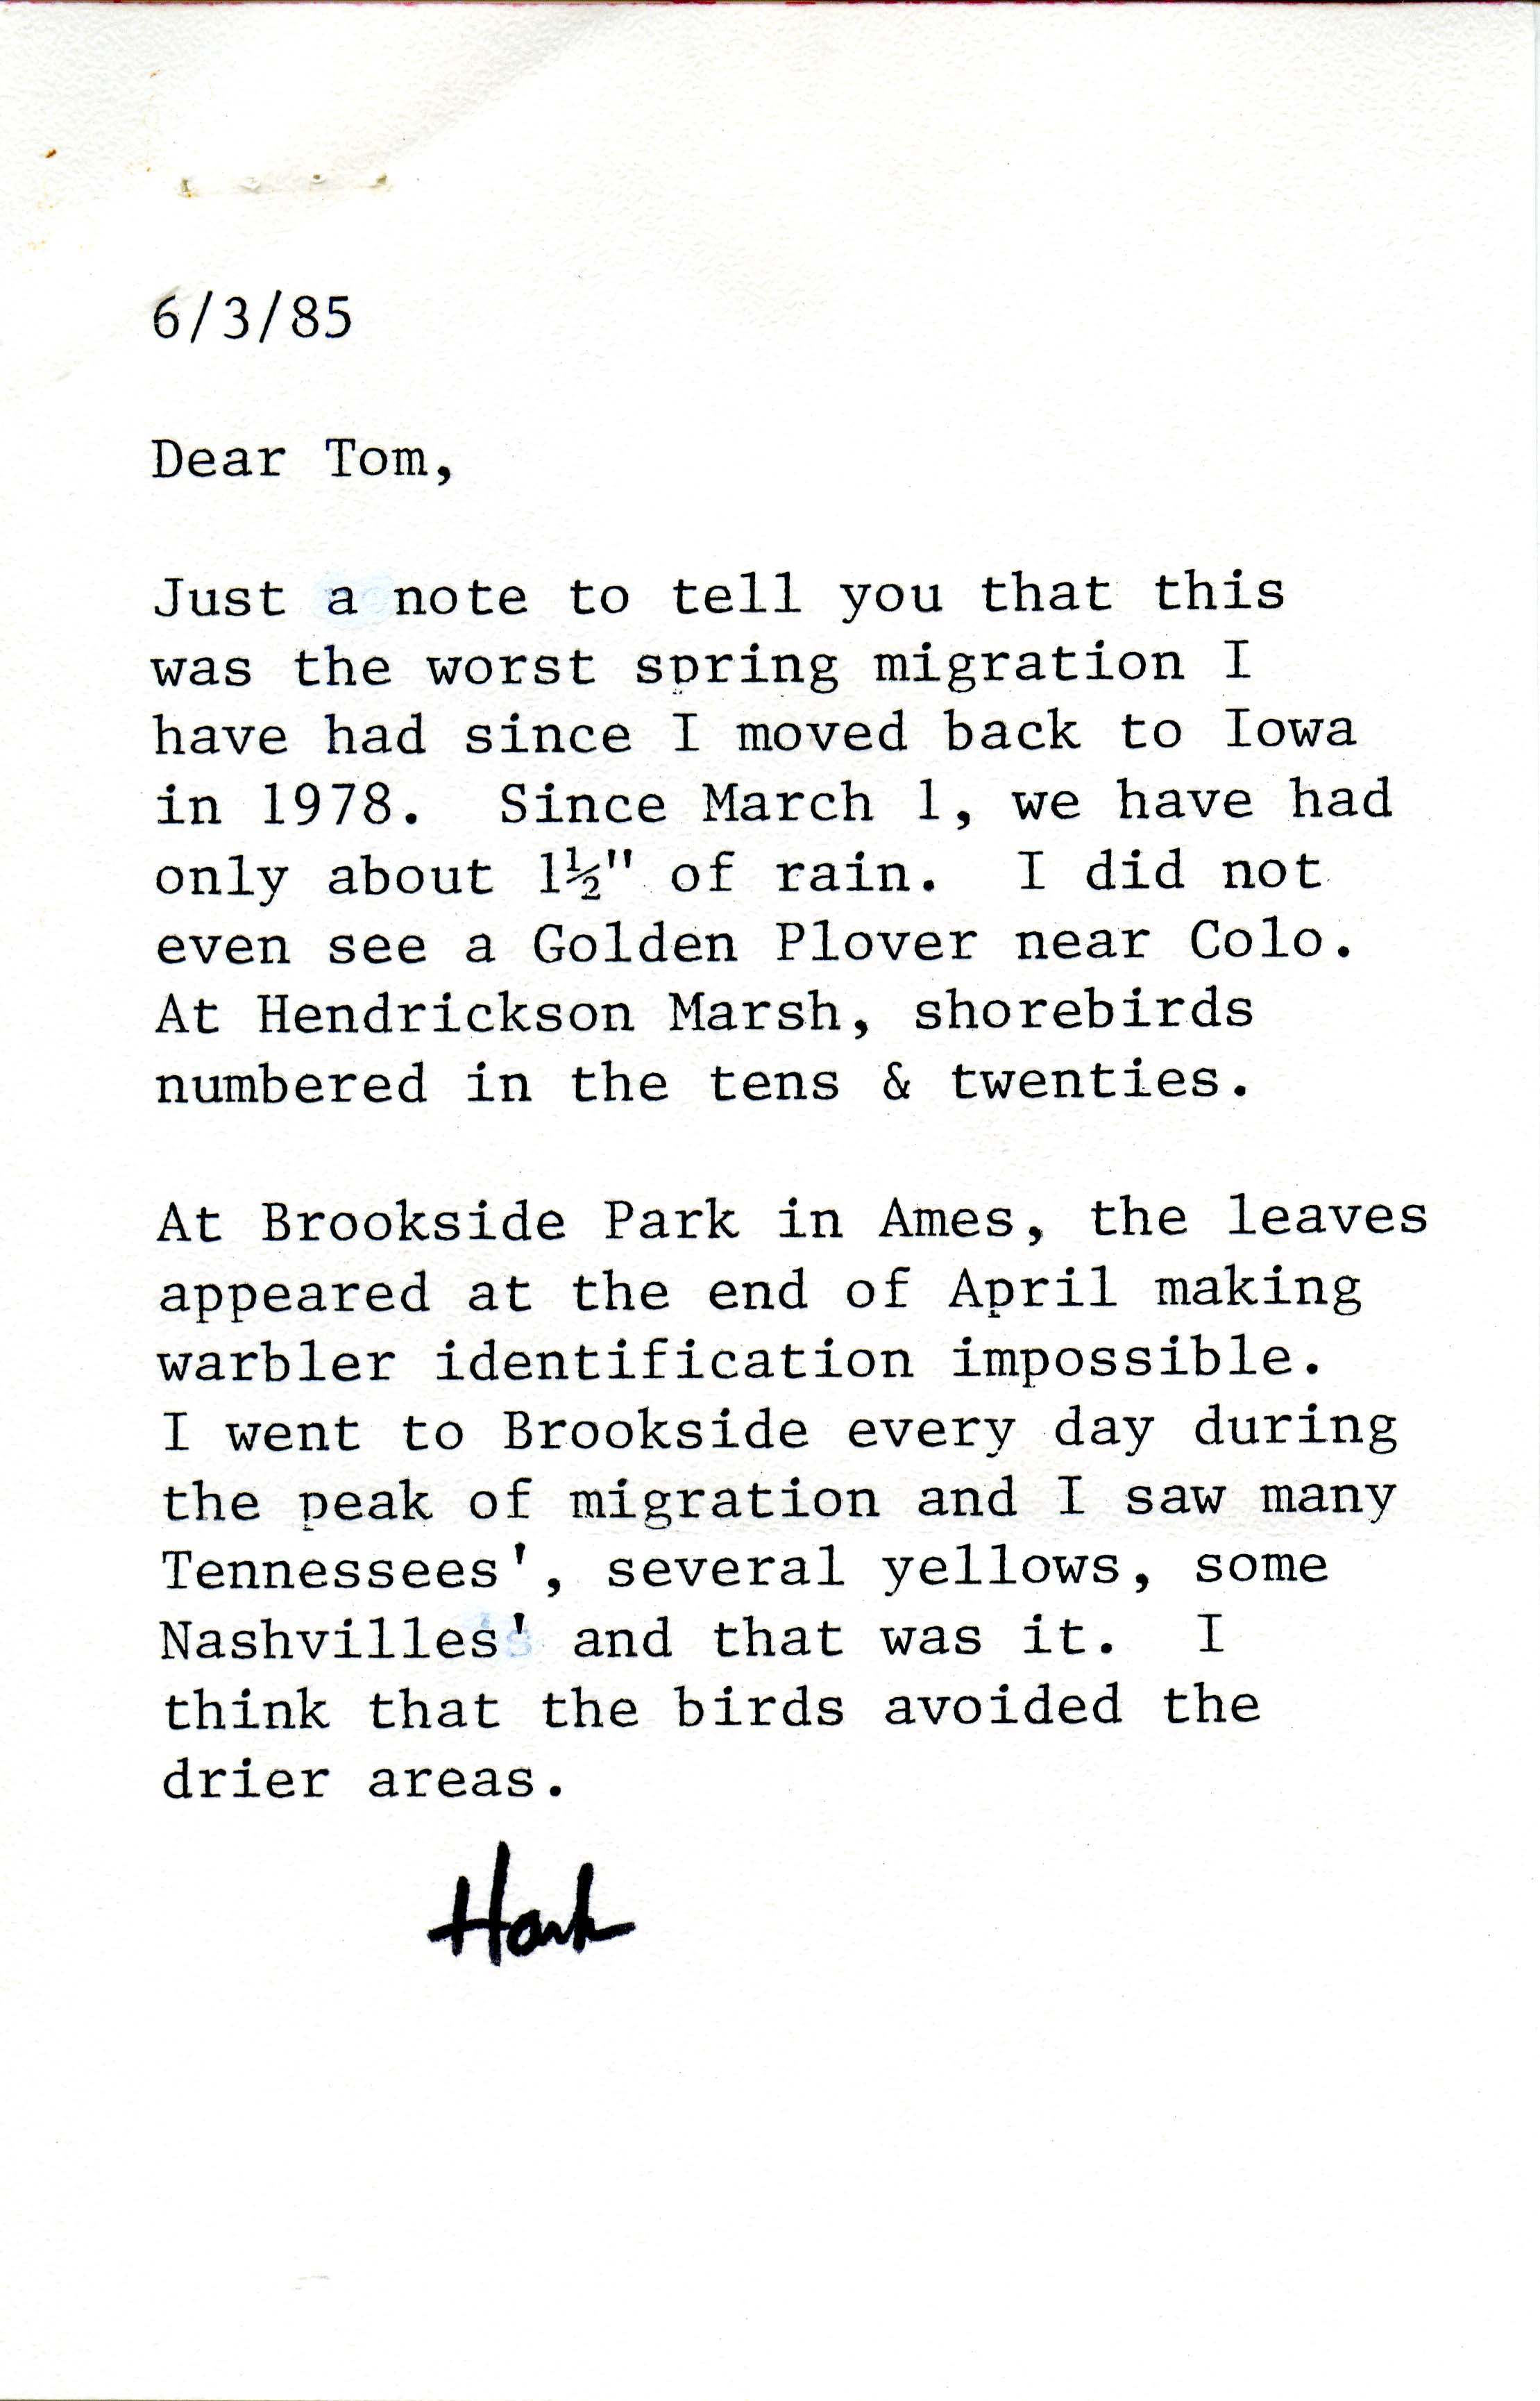 Hank Zaletel letter to Thomas H. Kent regarding poor spring migration, June 3, 1985, with accompanying field notes